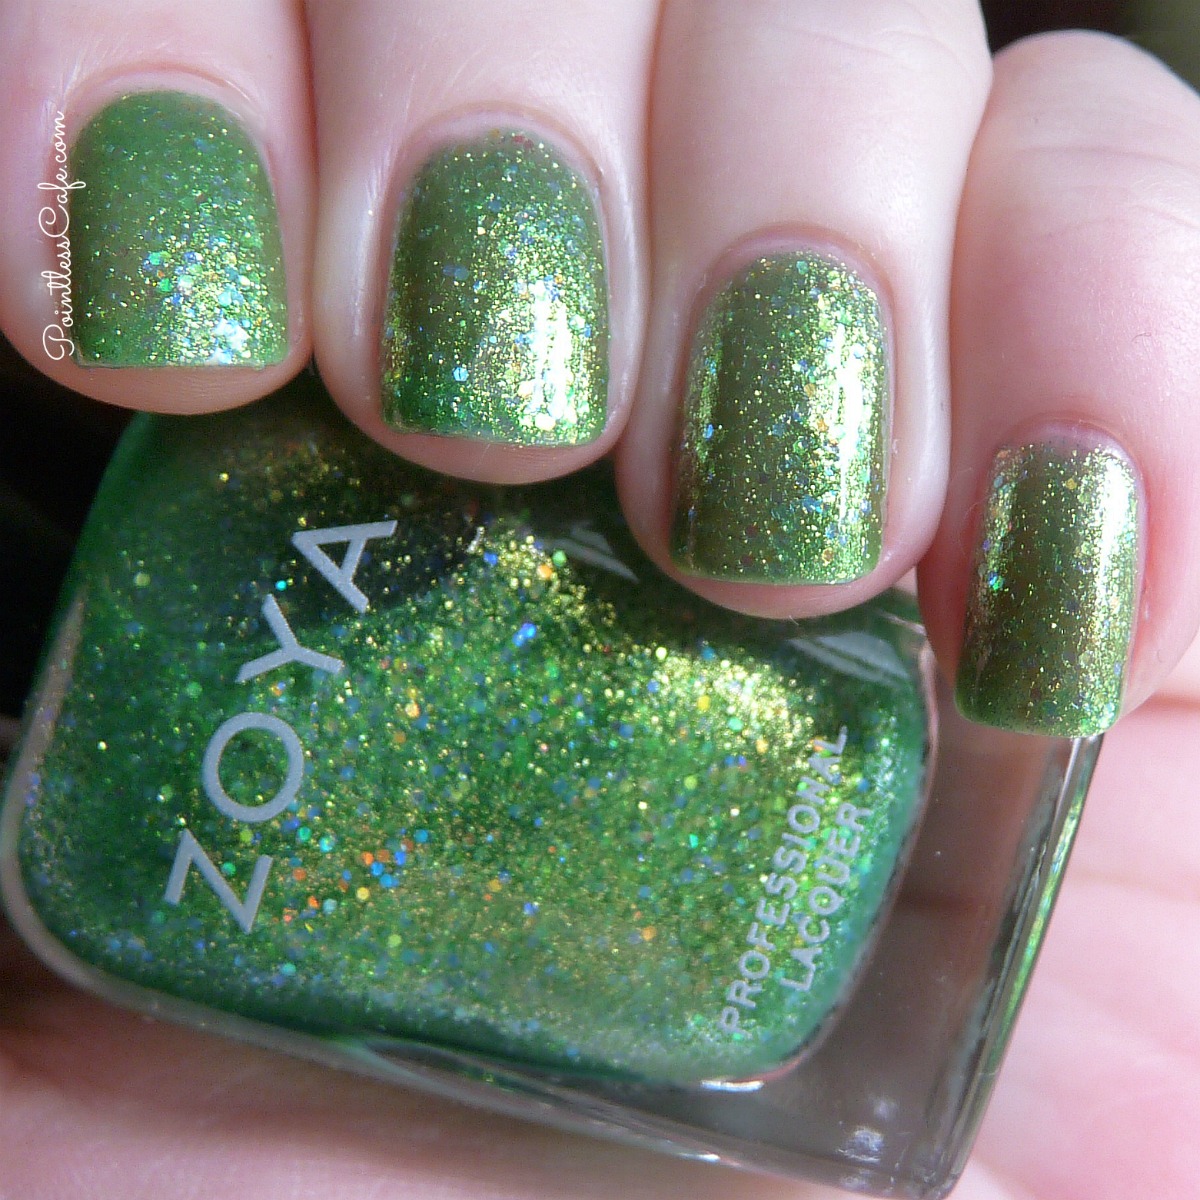 Zoya Bubbly Collection Summer 2014: Swatches and Review | Pointless Cafe